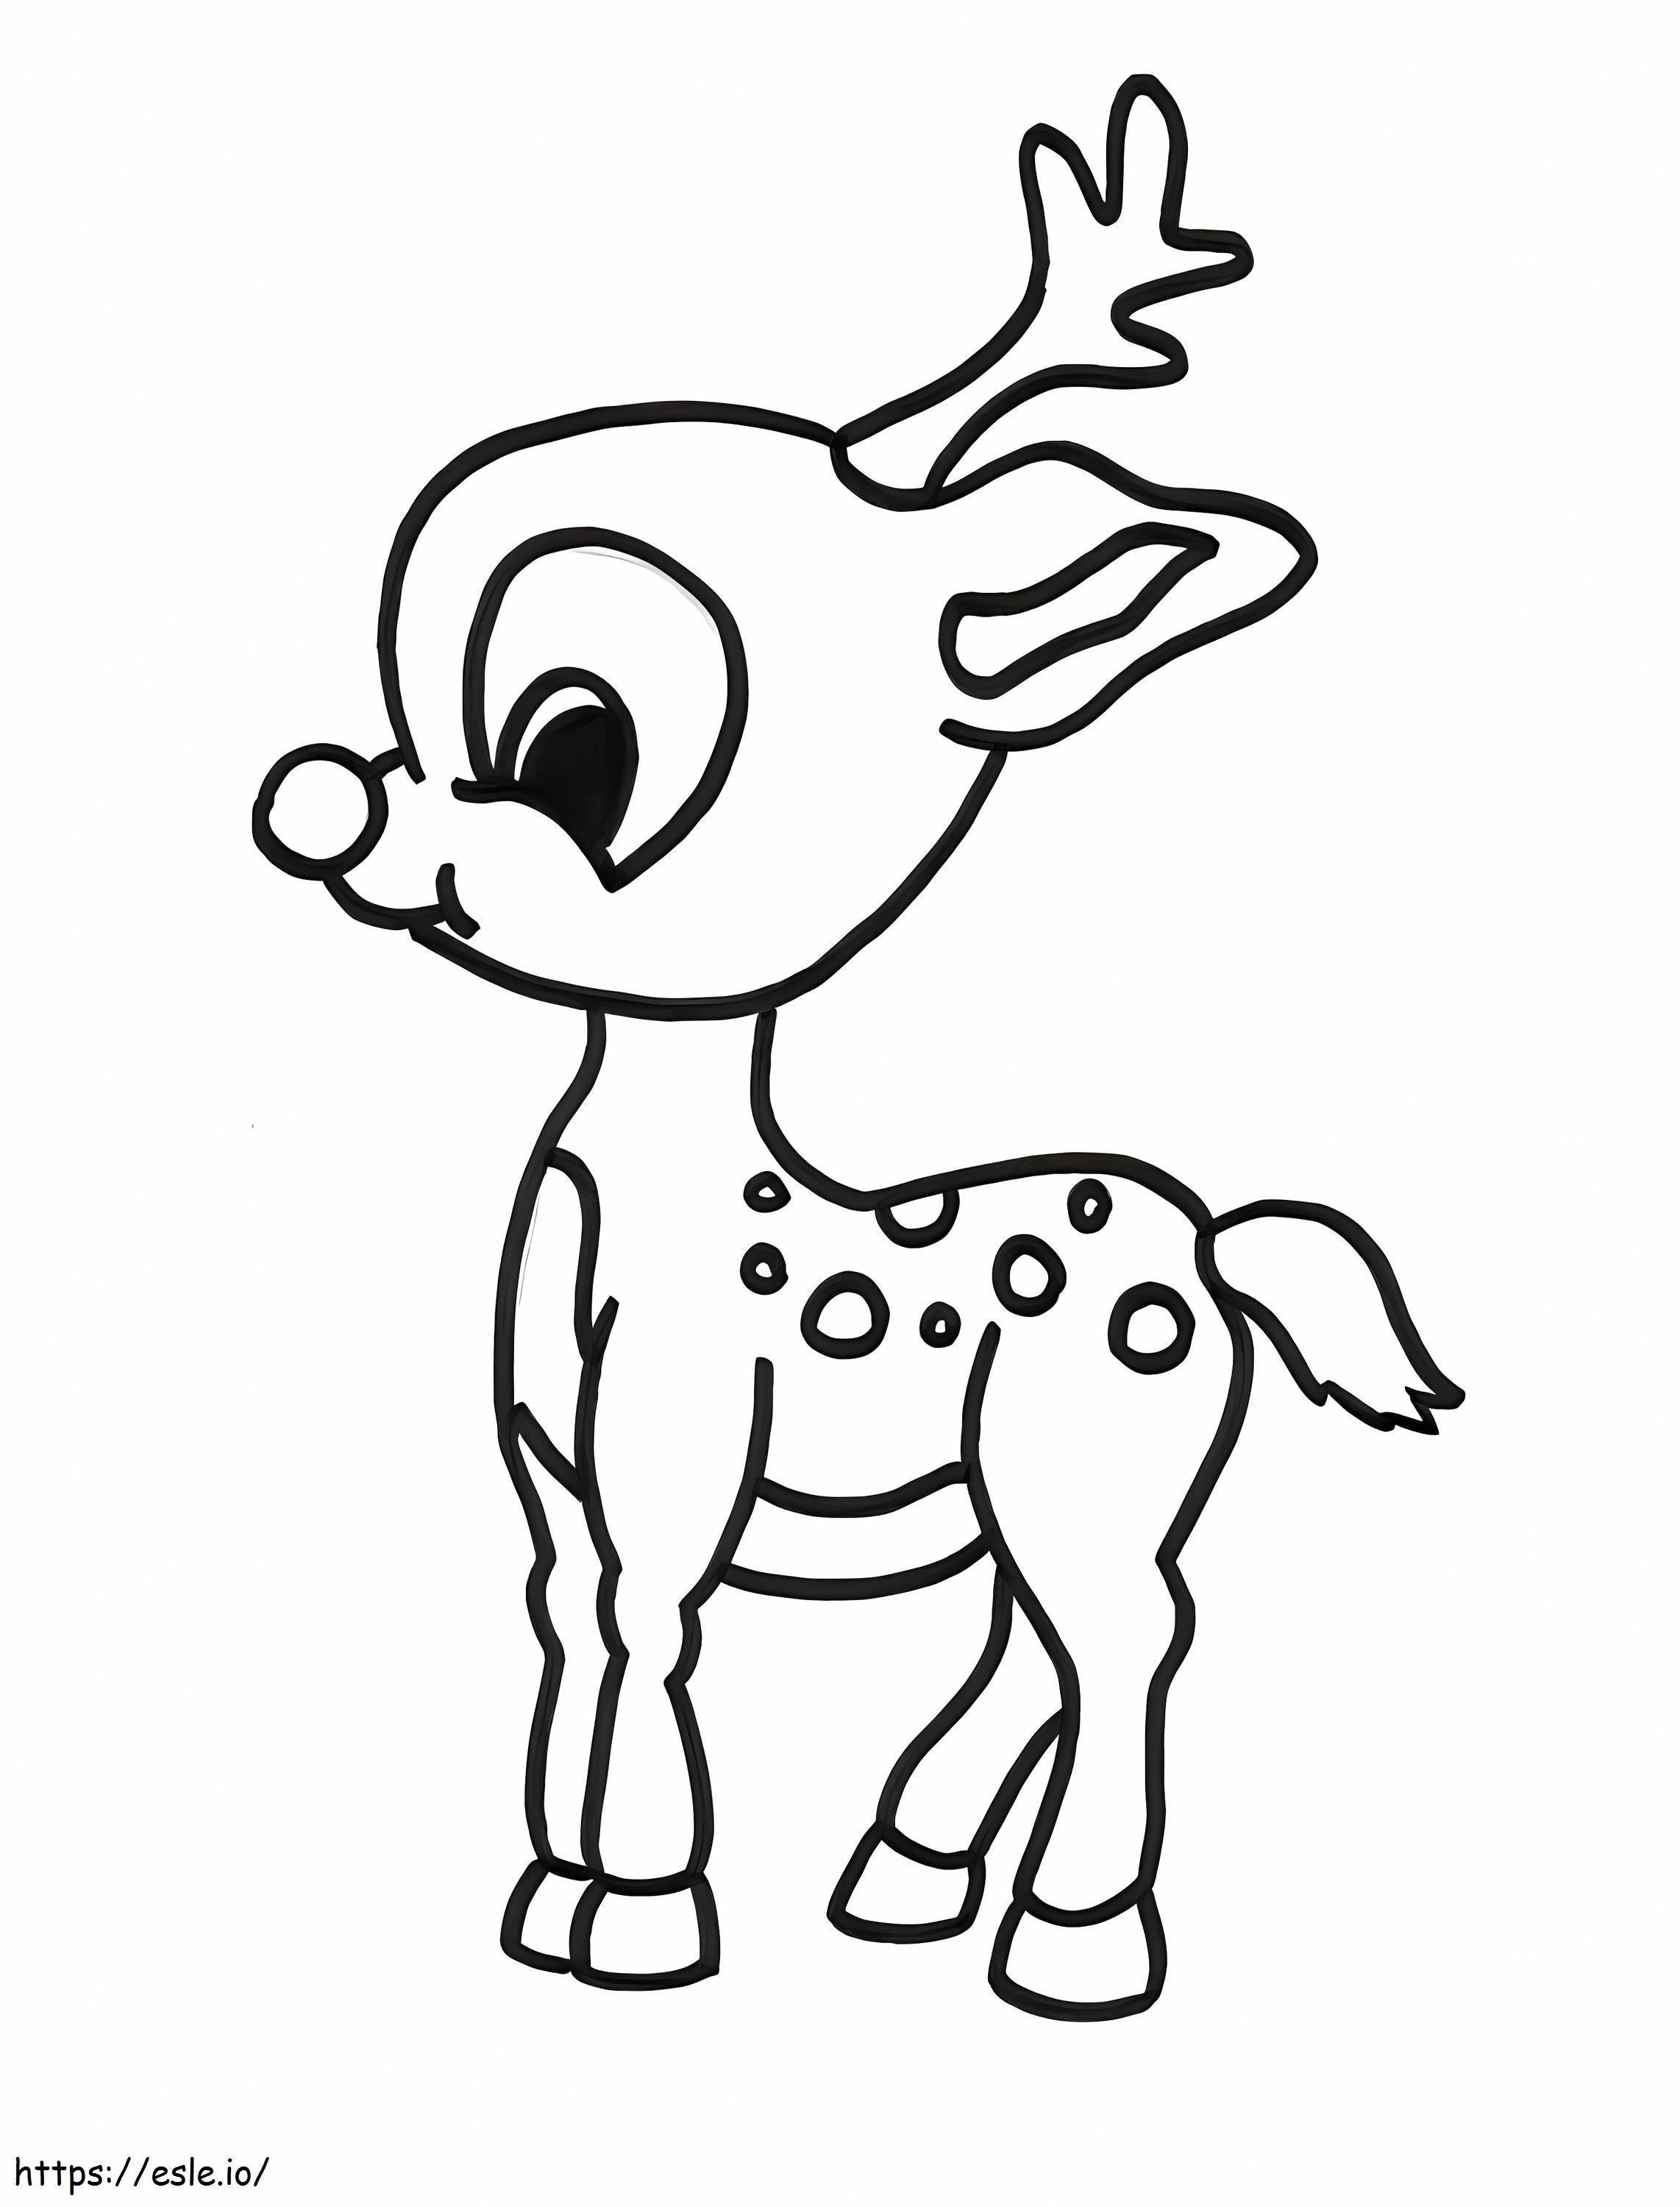 Cute Rudolph coloring page